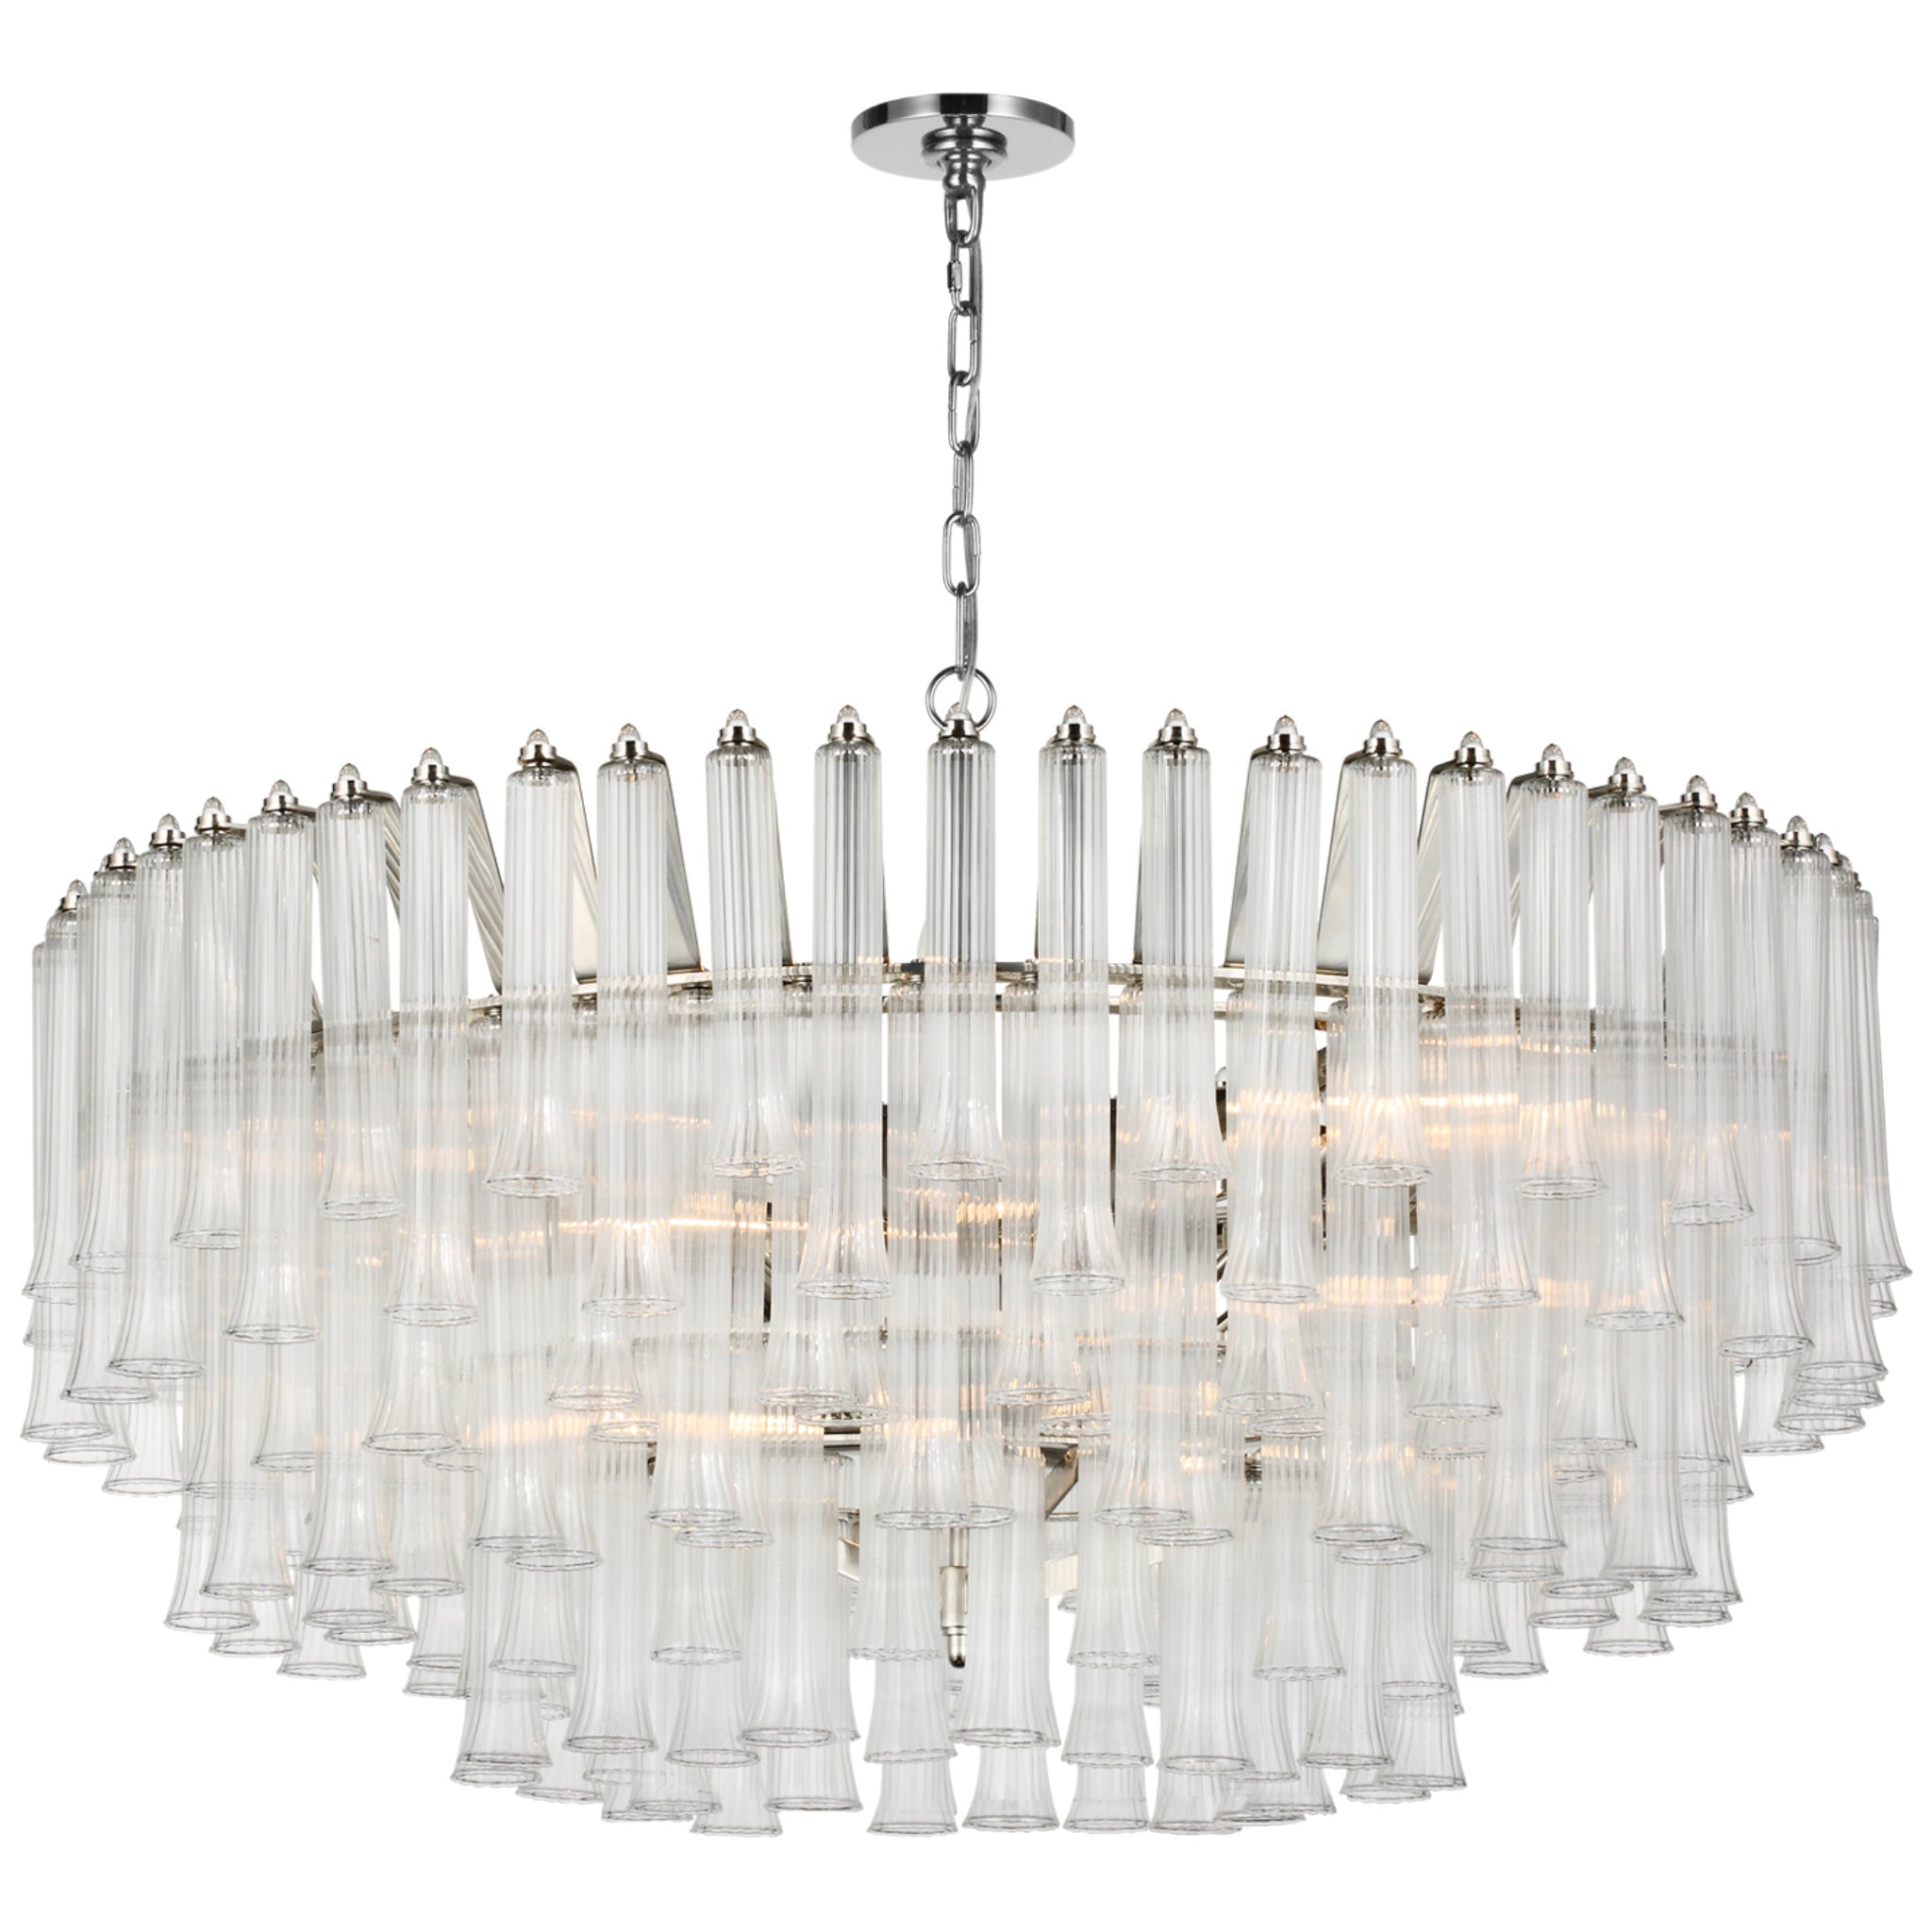 Julie Neill Lorelei X-Large Chandelier in Polished Nickel with Clear Glass